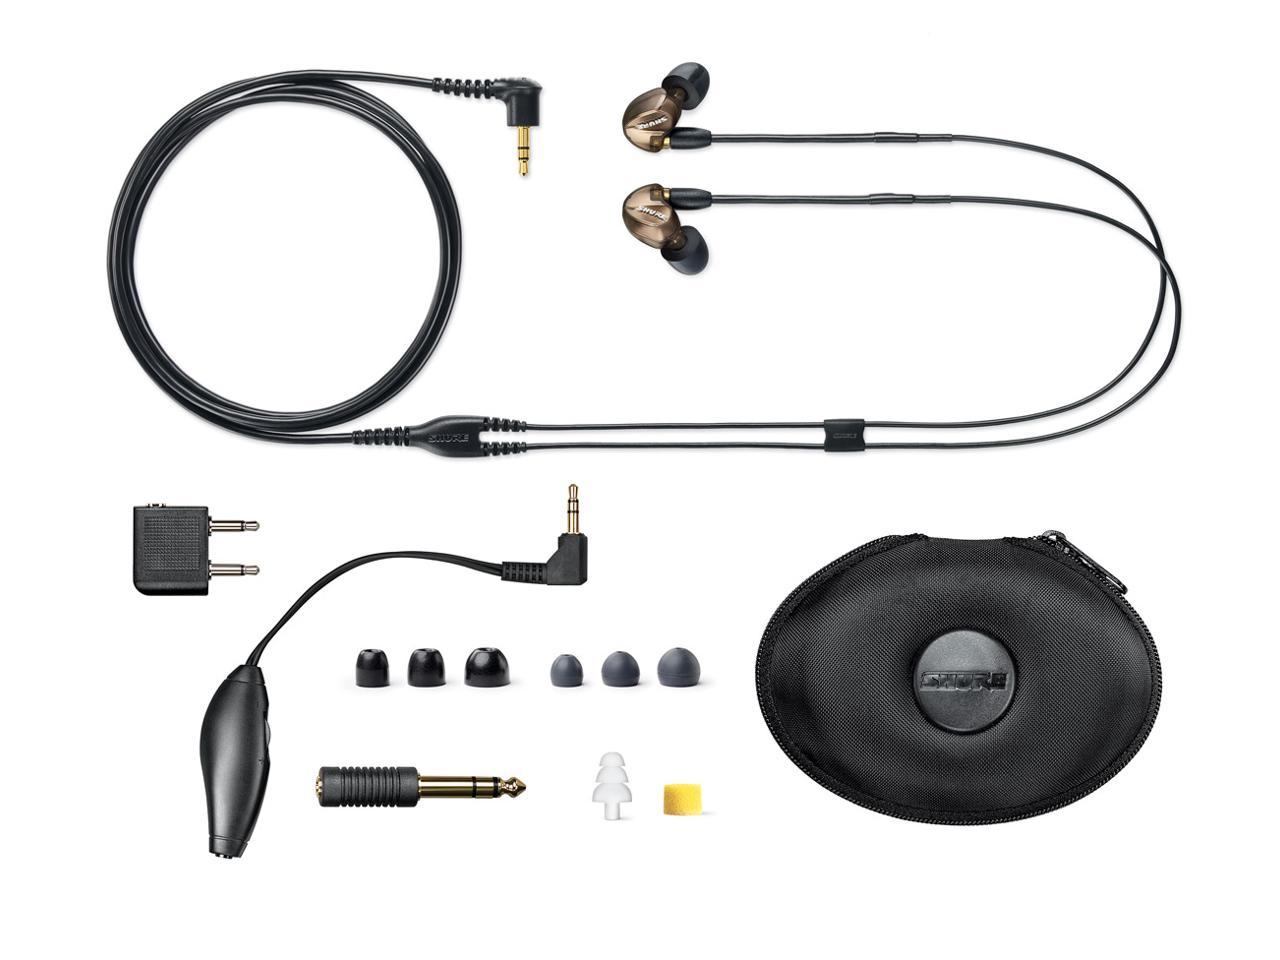 Shure SE425CL In-Ear Sound Isolating Dual Driver Earphones (Clear)